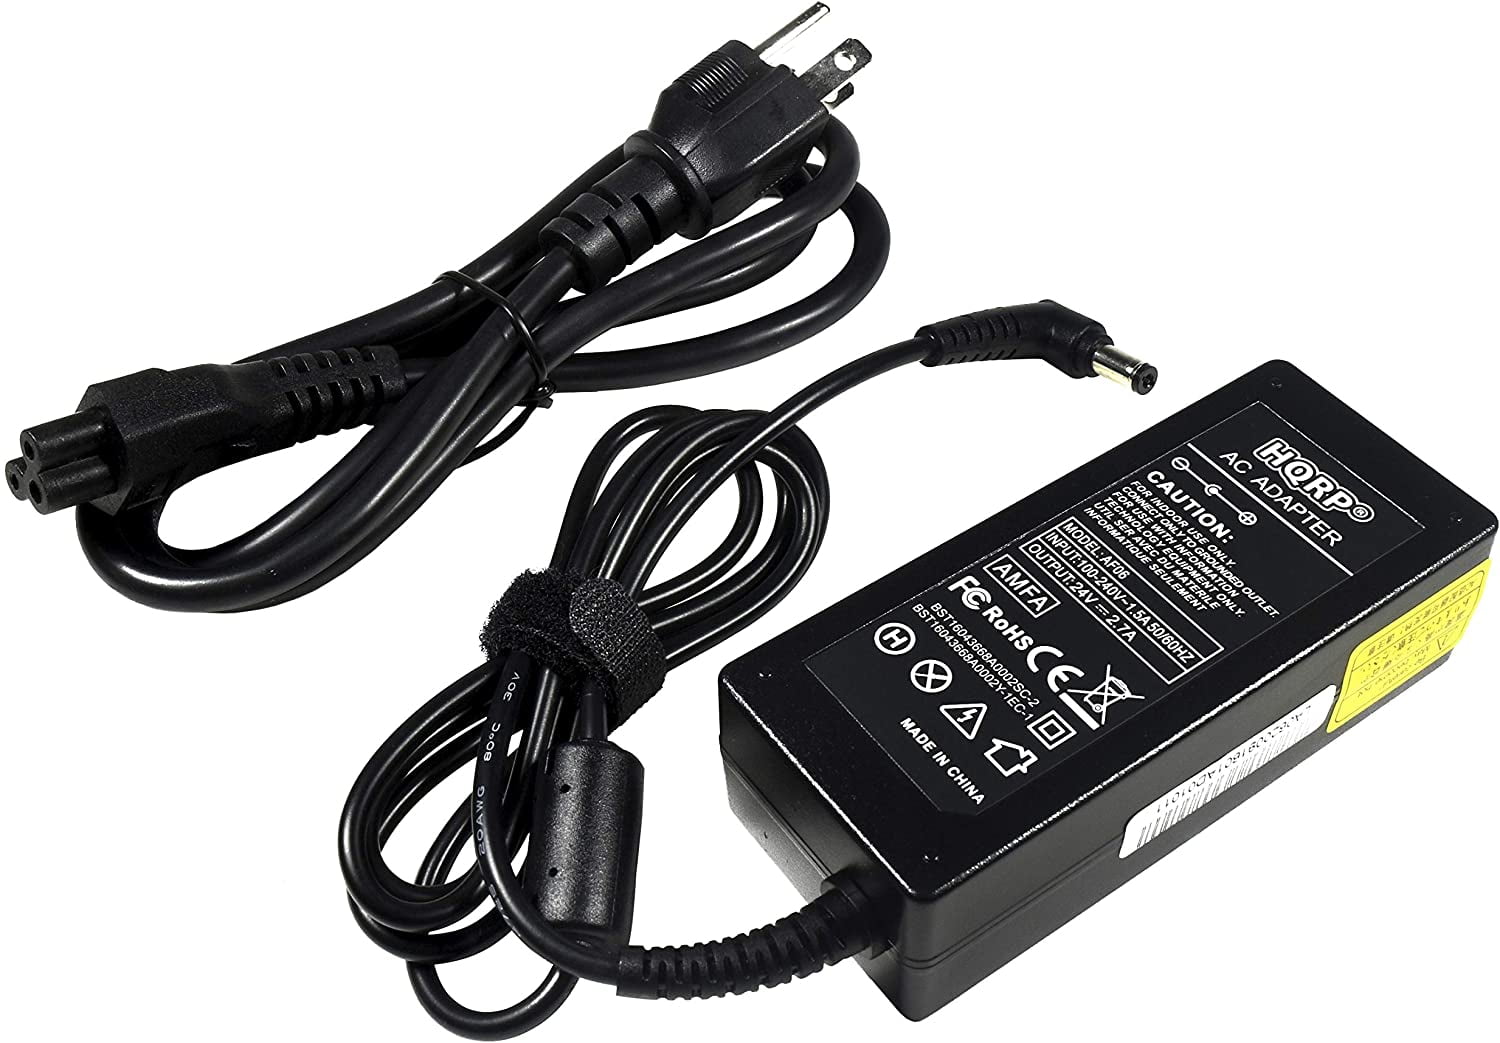 24V AC Adapter For LG 26LE5300 26" HD LED TV LCD HDTV Power Supply Cord Charger 